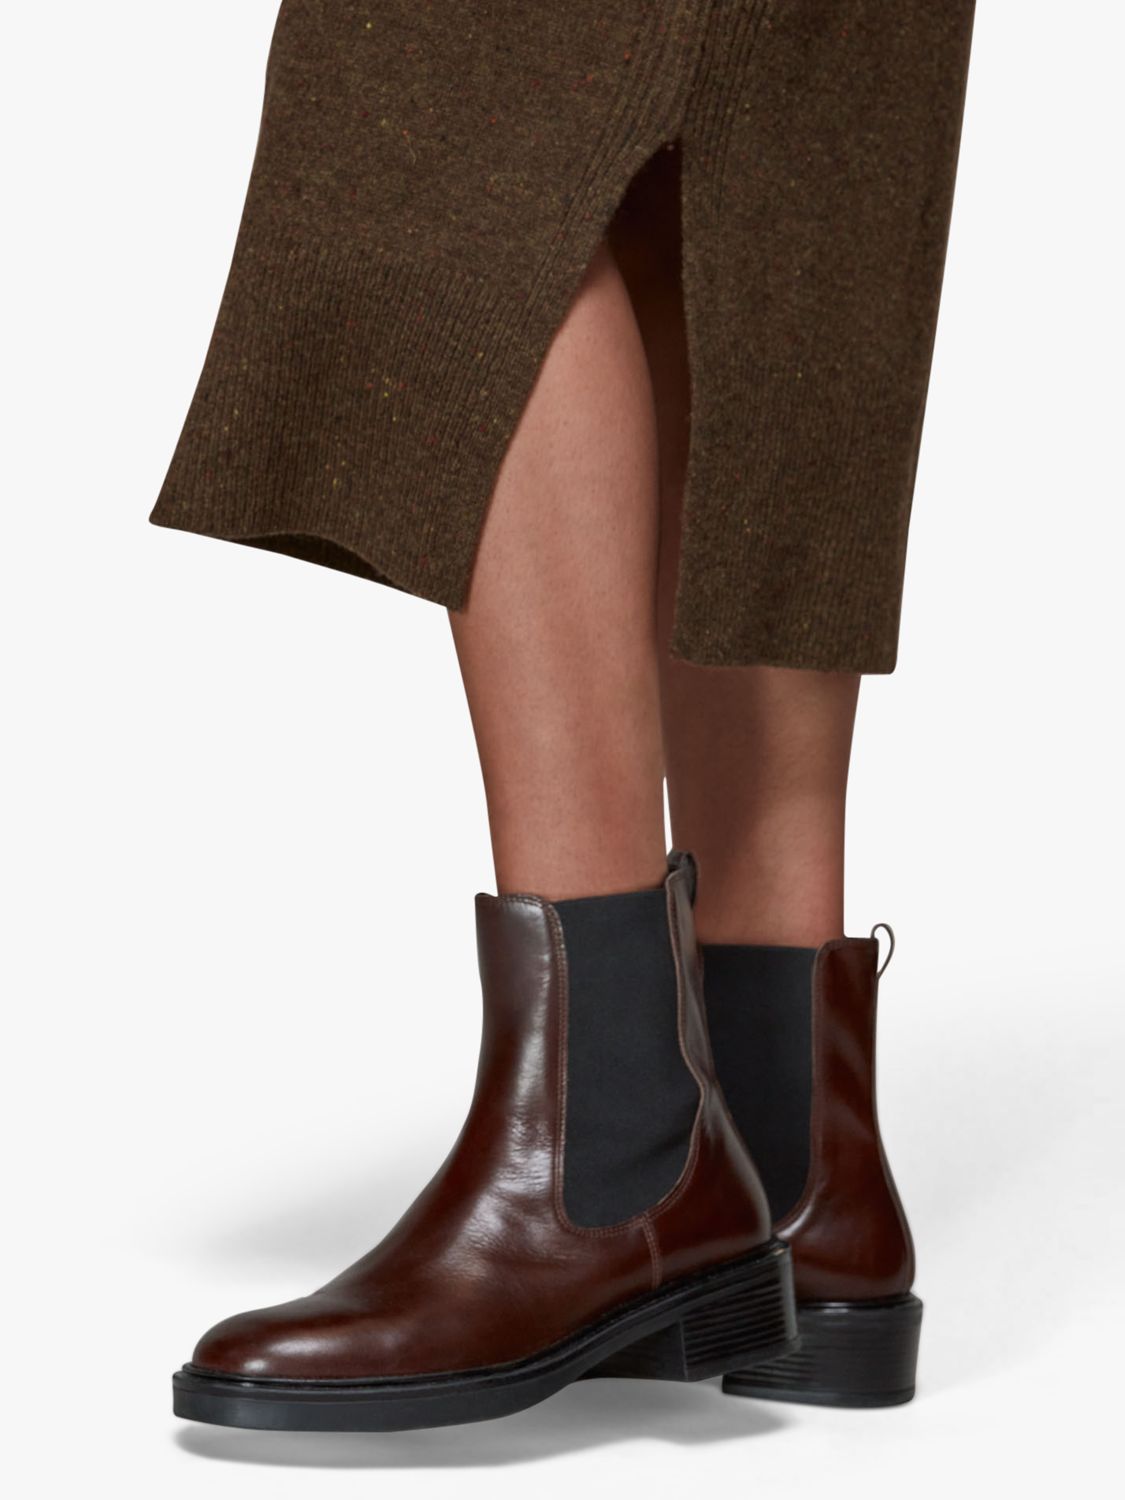 Whistles Rue Elasticated Leather Boots, Burgundy at John Lewis &